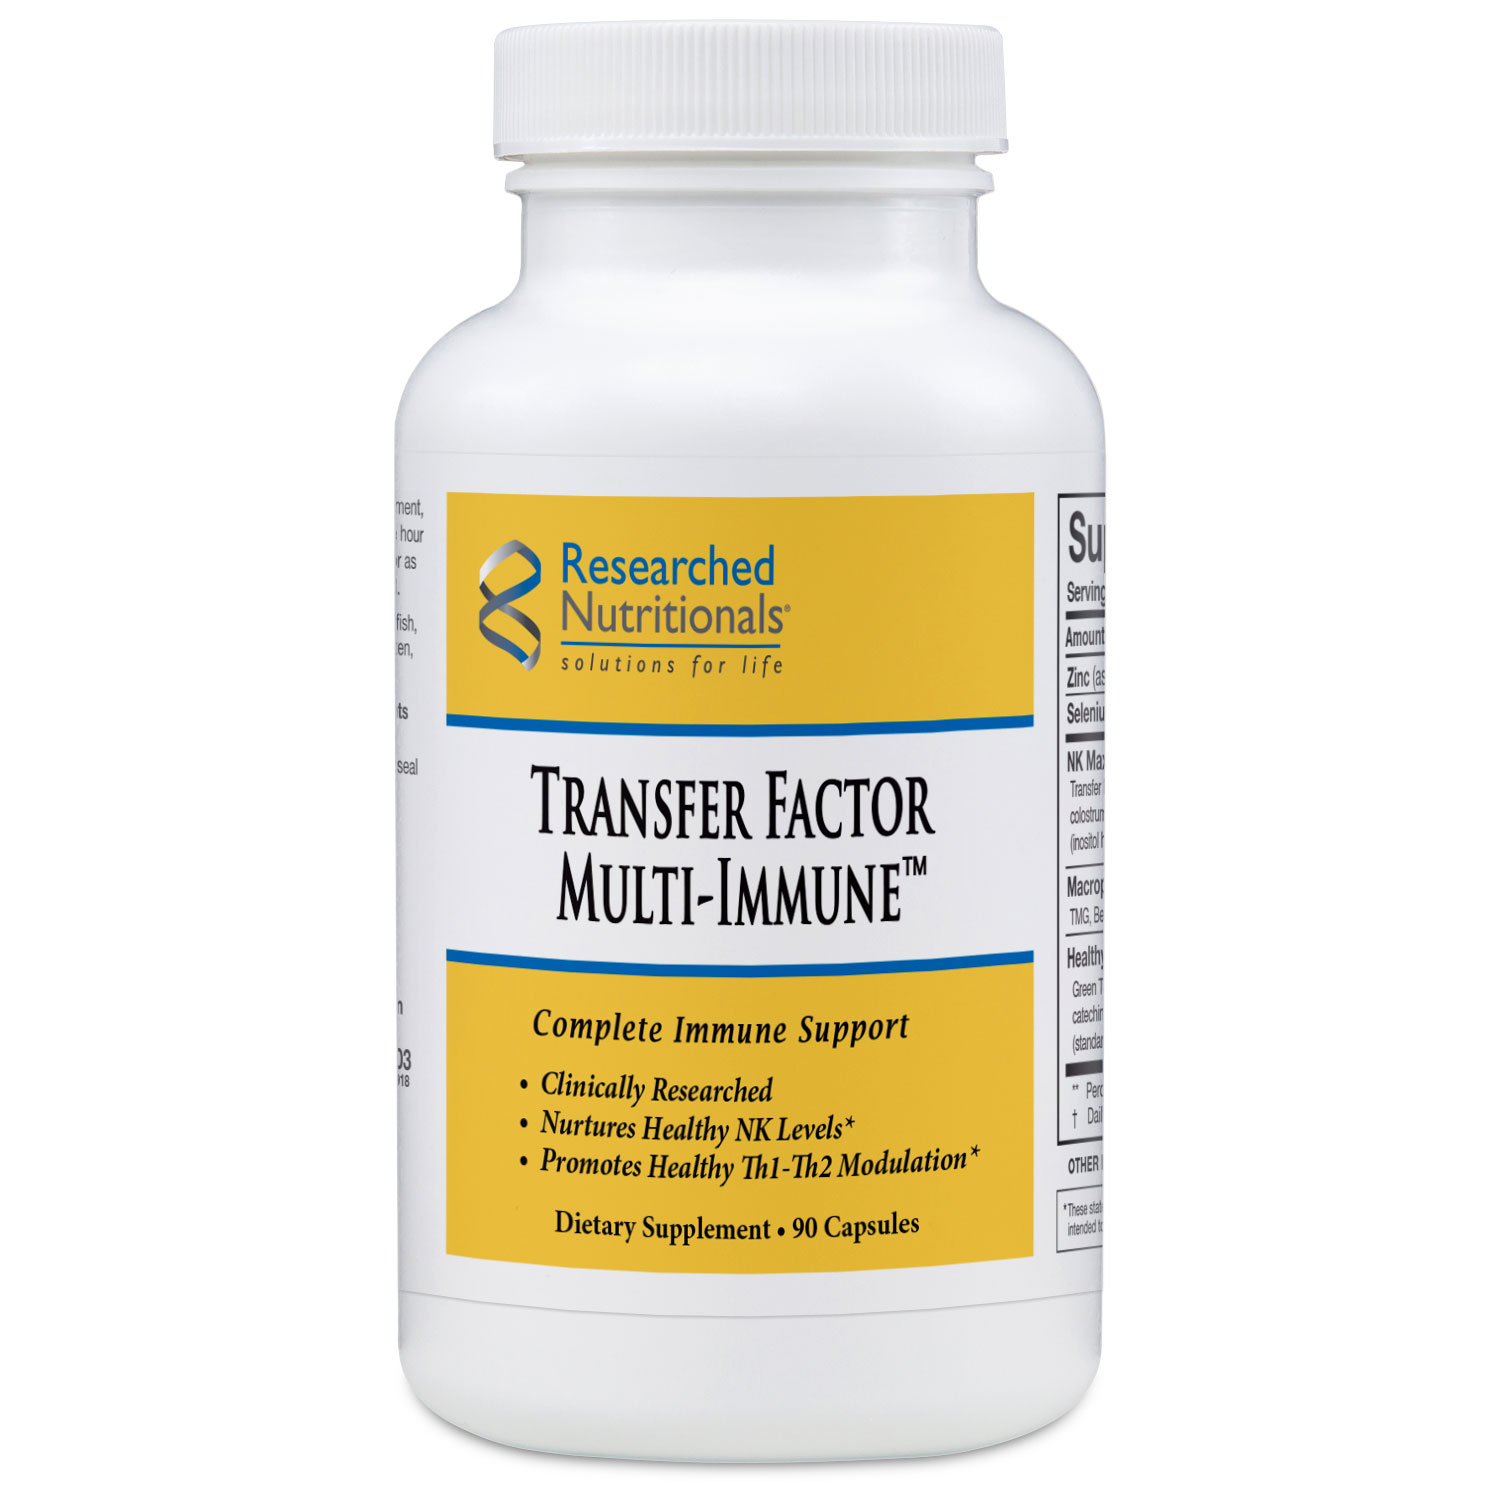 RESEARCHED NUTRITIONALS - Transfer Factor Multi-Immune